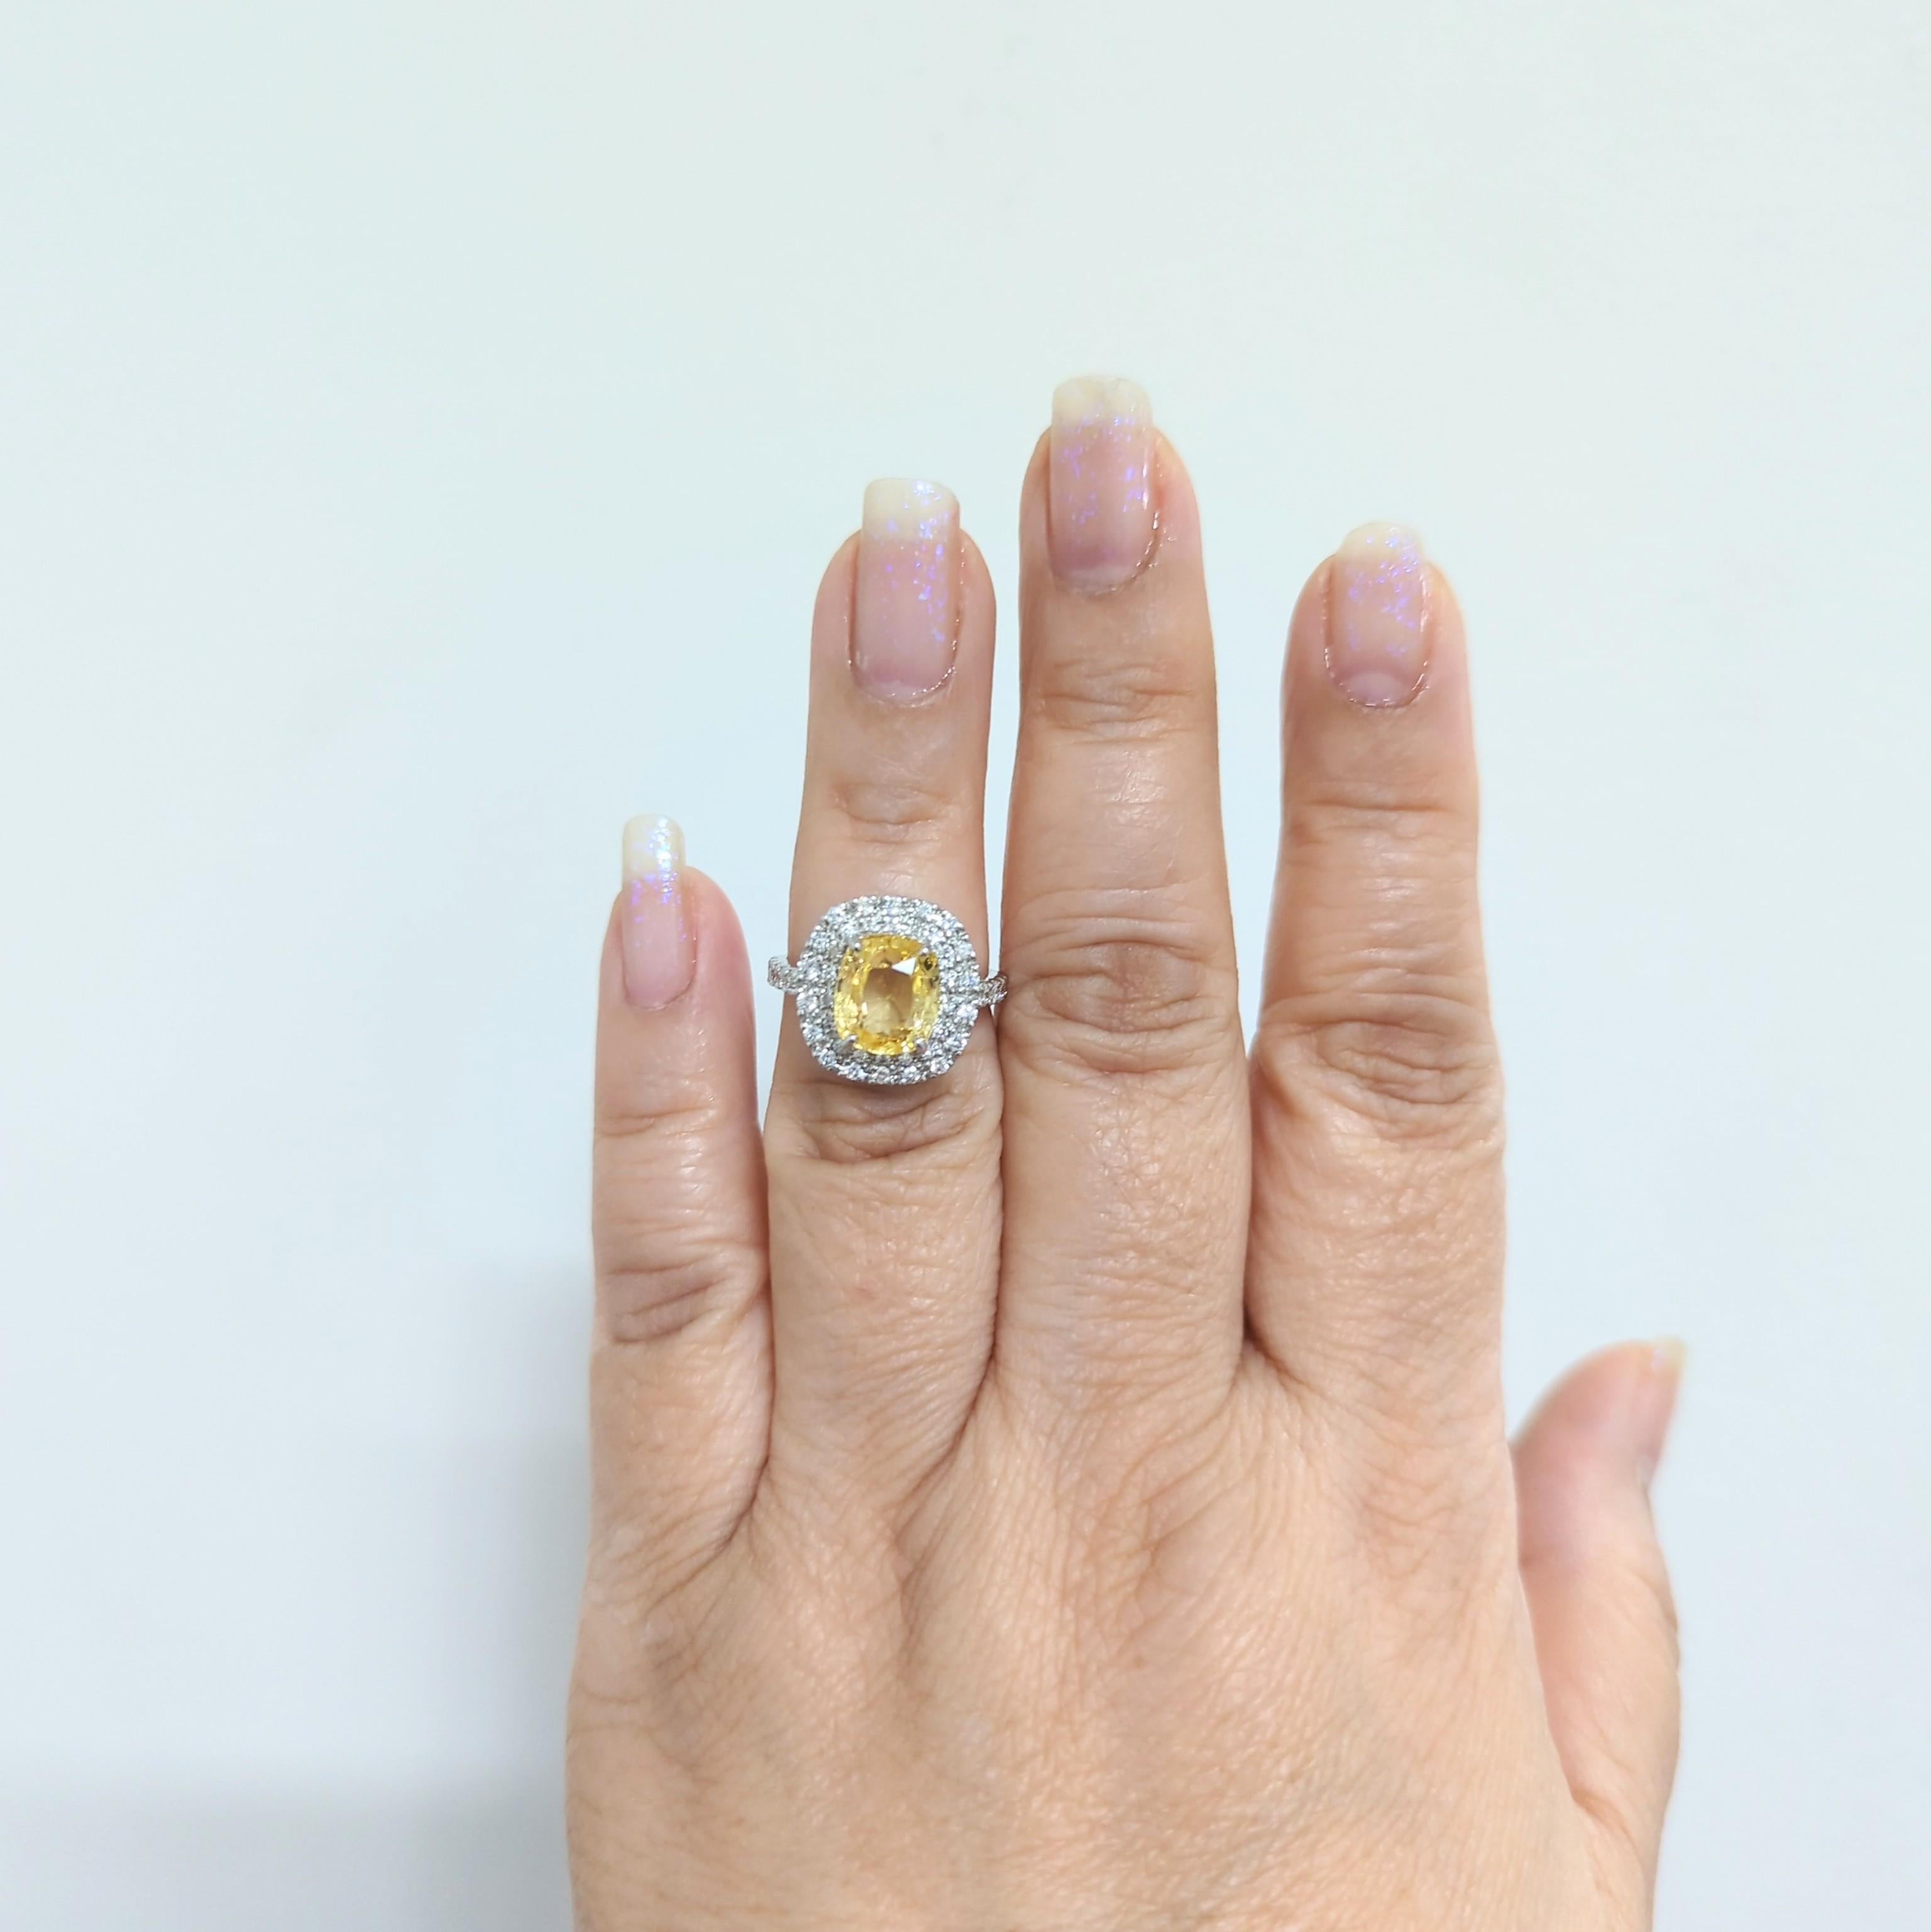 Bright and beautiful 4.25 ct. GIA unheated Sri Lanka orangy yellow sapphire cushion with good quality white diamond rounds.  Handmade in platinum.  Ring size 6+. GIA certificate included.